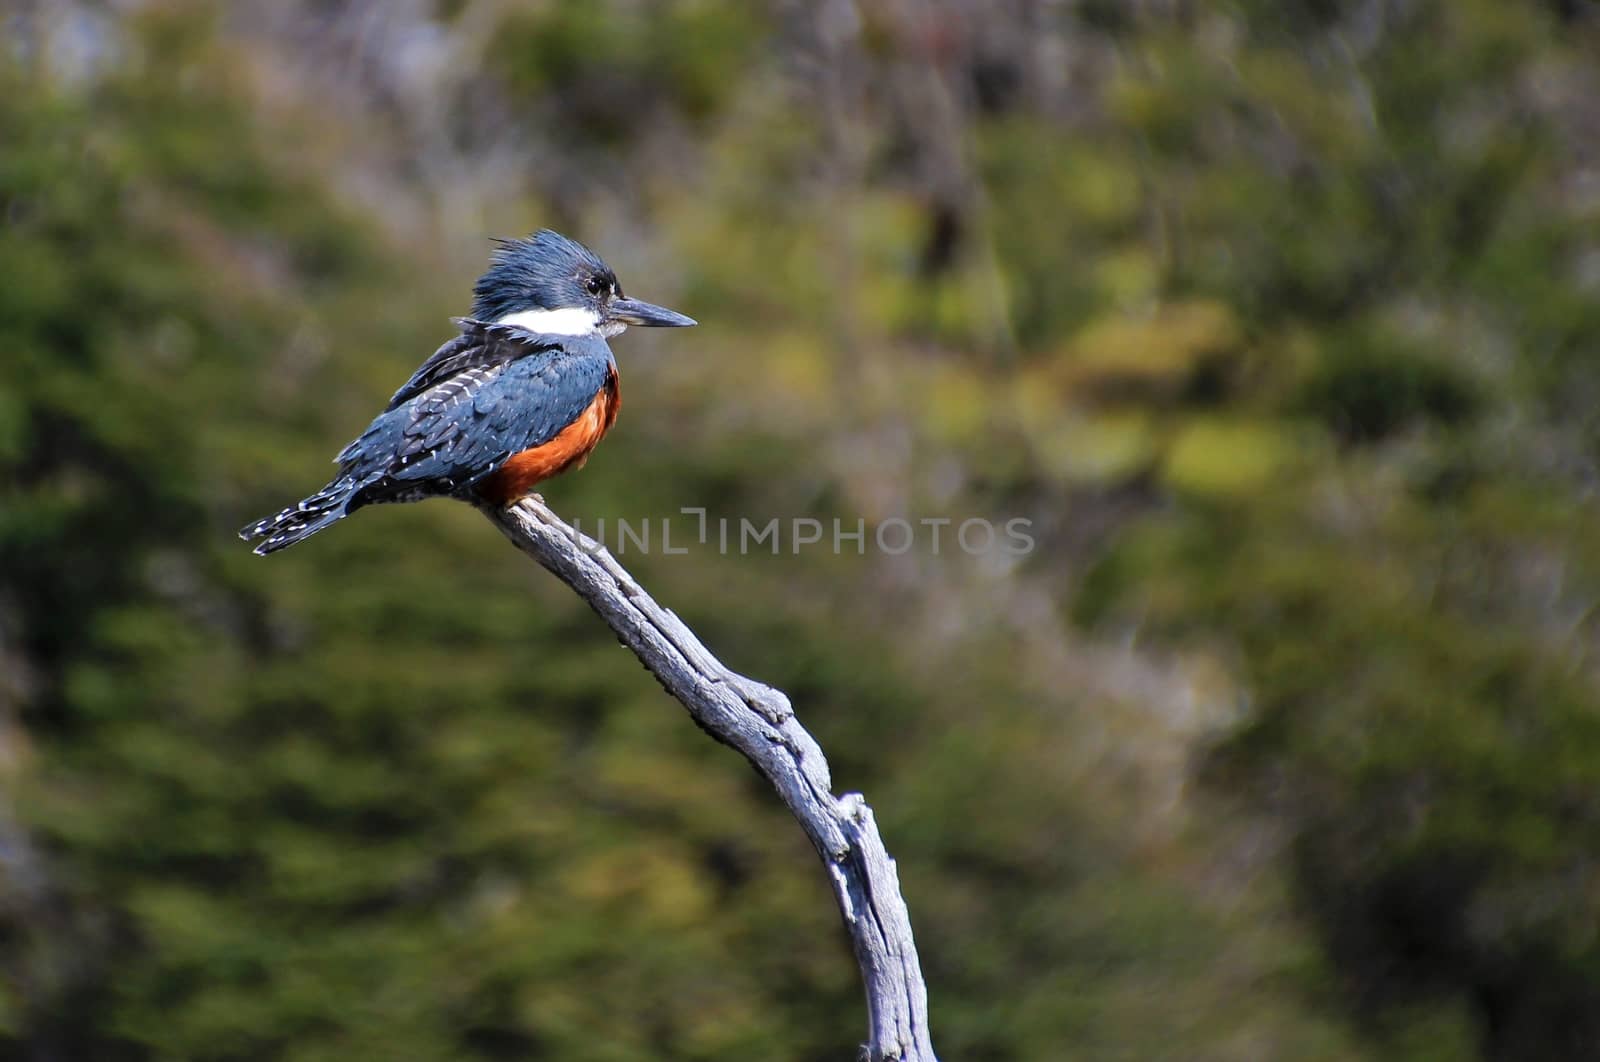 Beautiful Ringed Kingfisher, megaceryle torquata, on a tree branch, Tierra Del Fuego, Patagonia, Argentina by cicloco